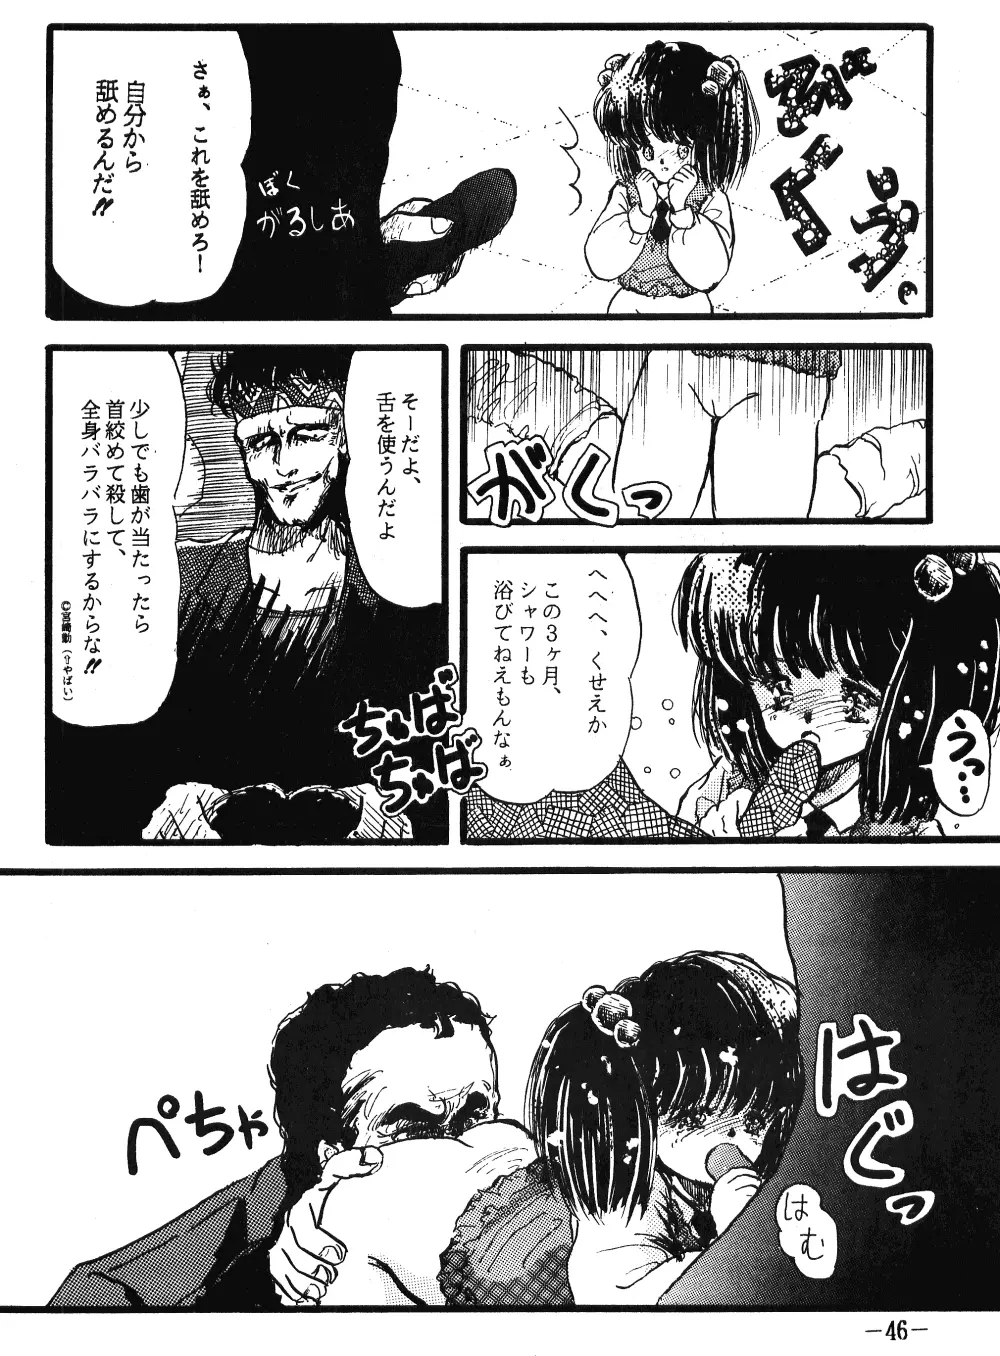 Fro2 Fight Vol. 1 Page.46